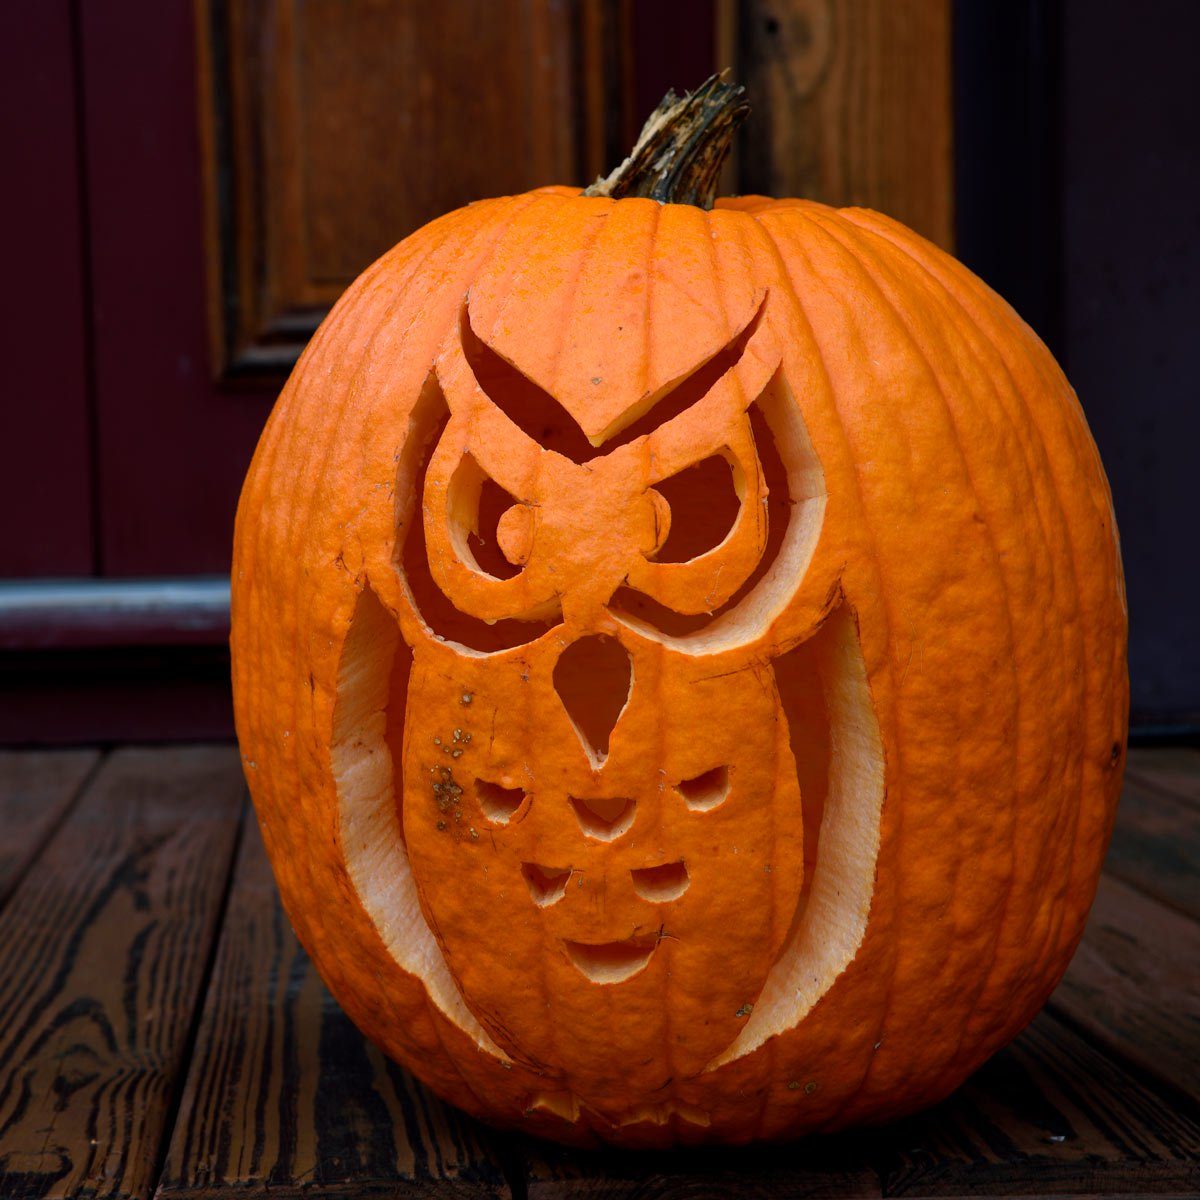 20-pumpkin-carving-ideas-to-inspire-you-this-halloween-reader-s-digest